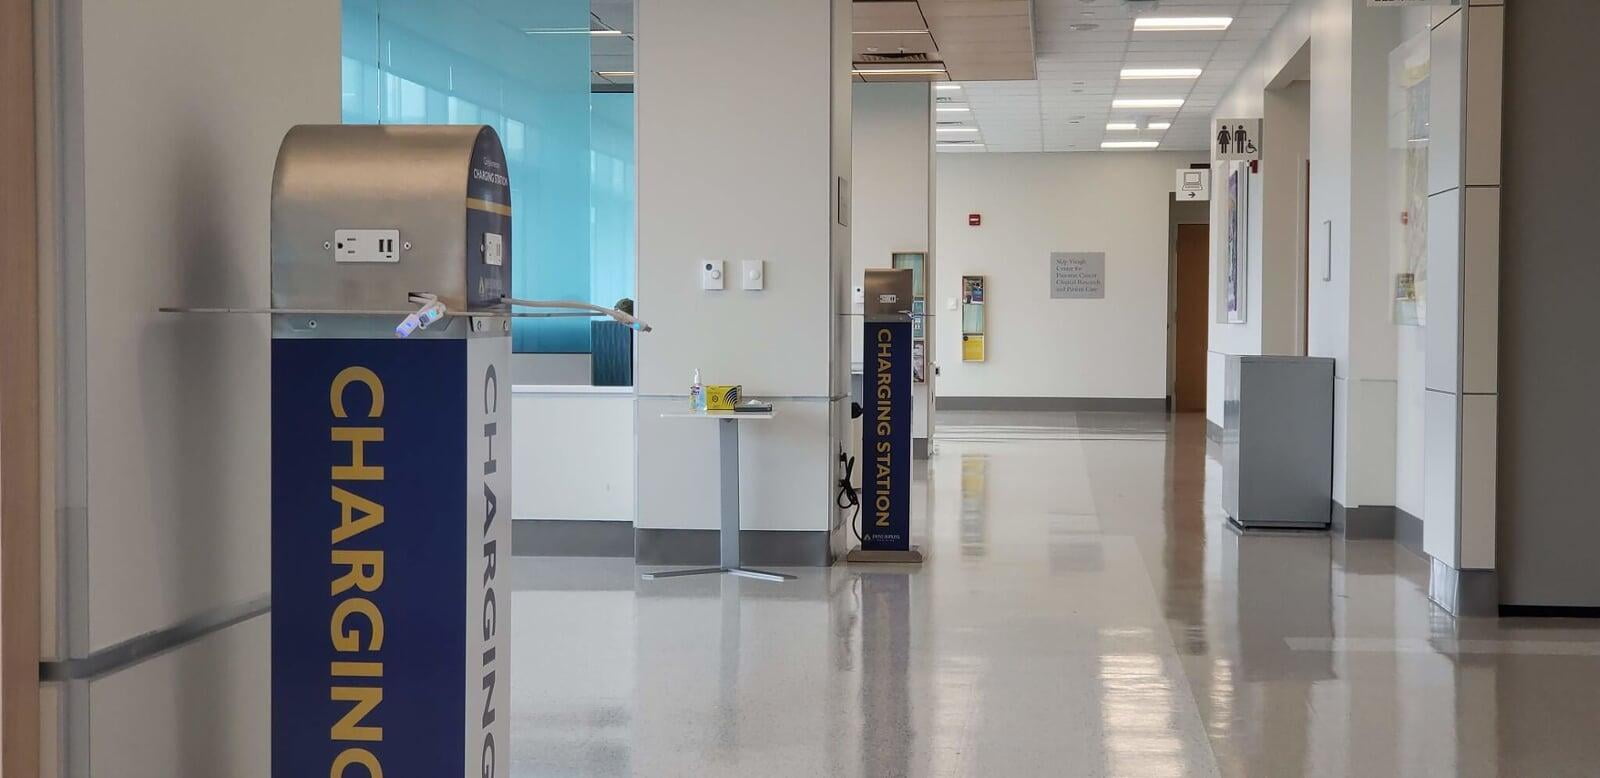 Keeping Hospitals Clean and Connected This Flu Season